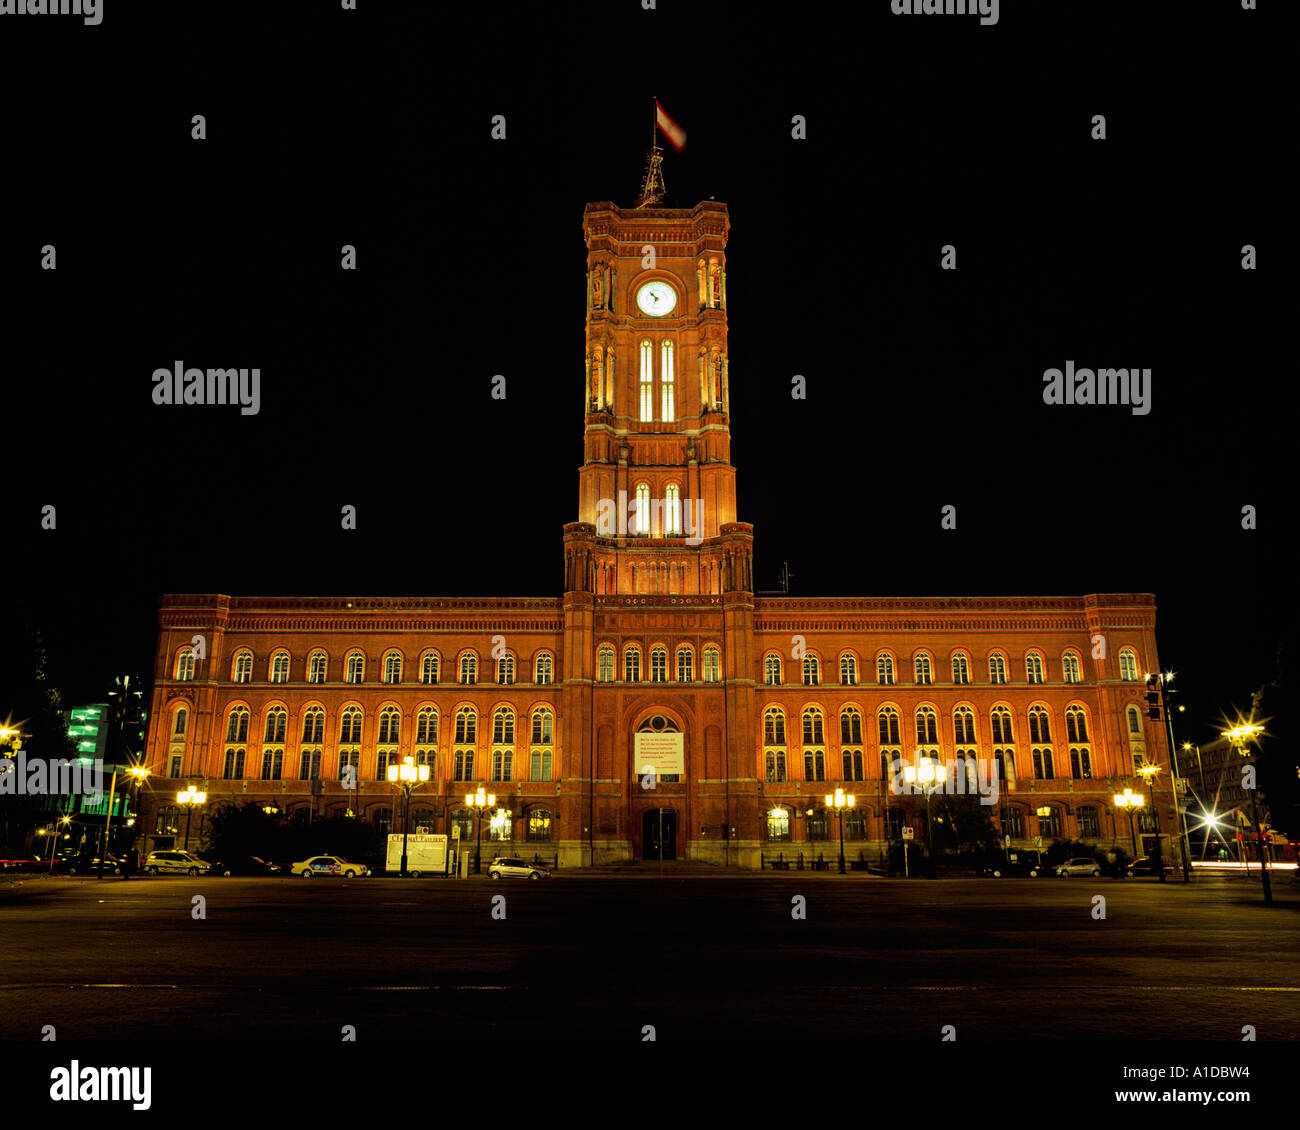 Berliner Rathaus Red Town Hall office of Governing Mayor AlexPlatz Berlin Germany Central Europe Stock Photo